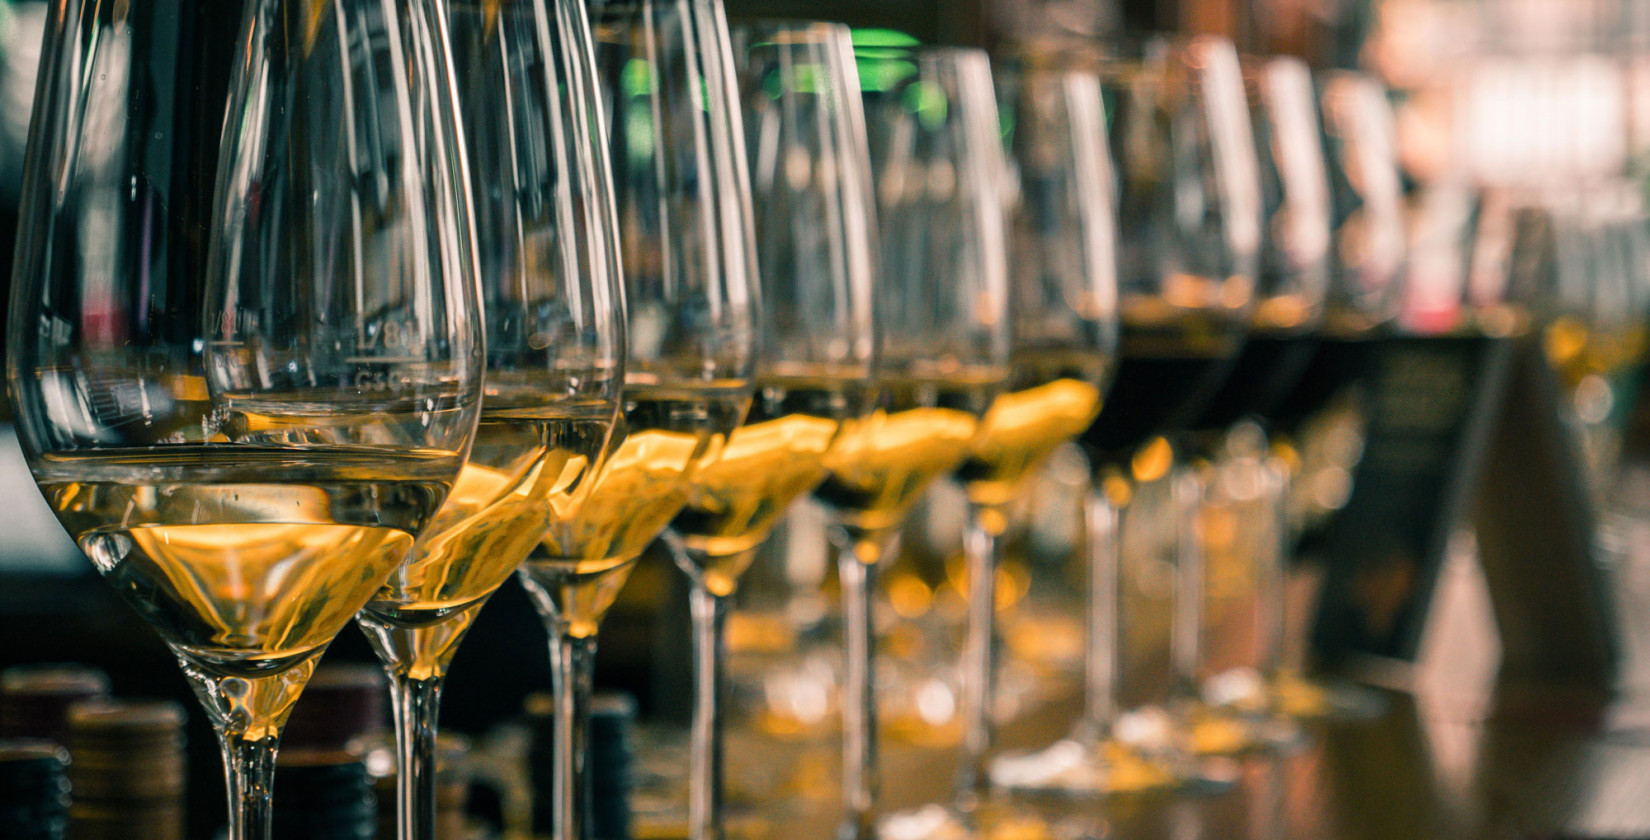 Numerous lined up wine glasses filled with white wine